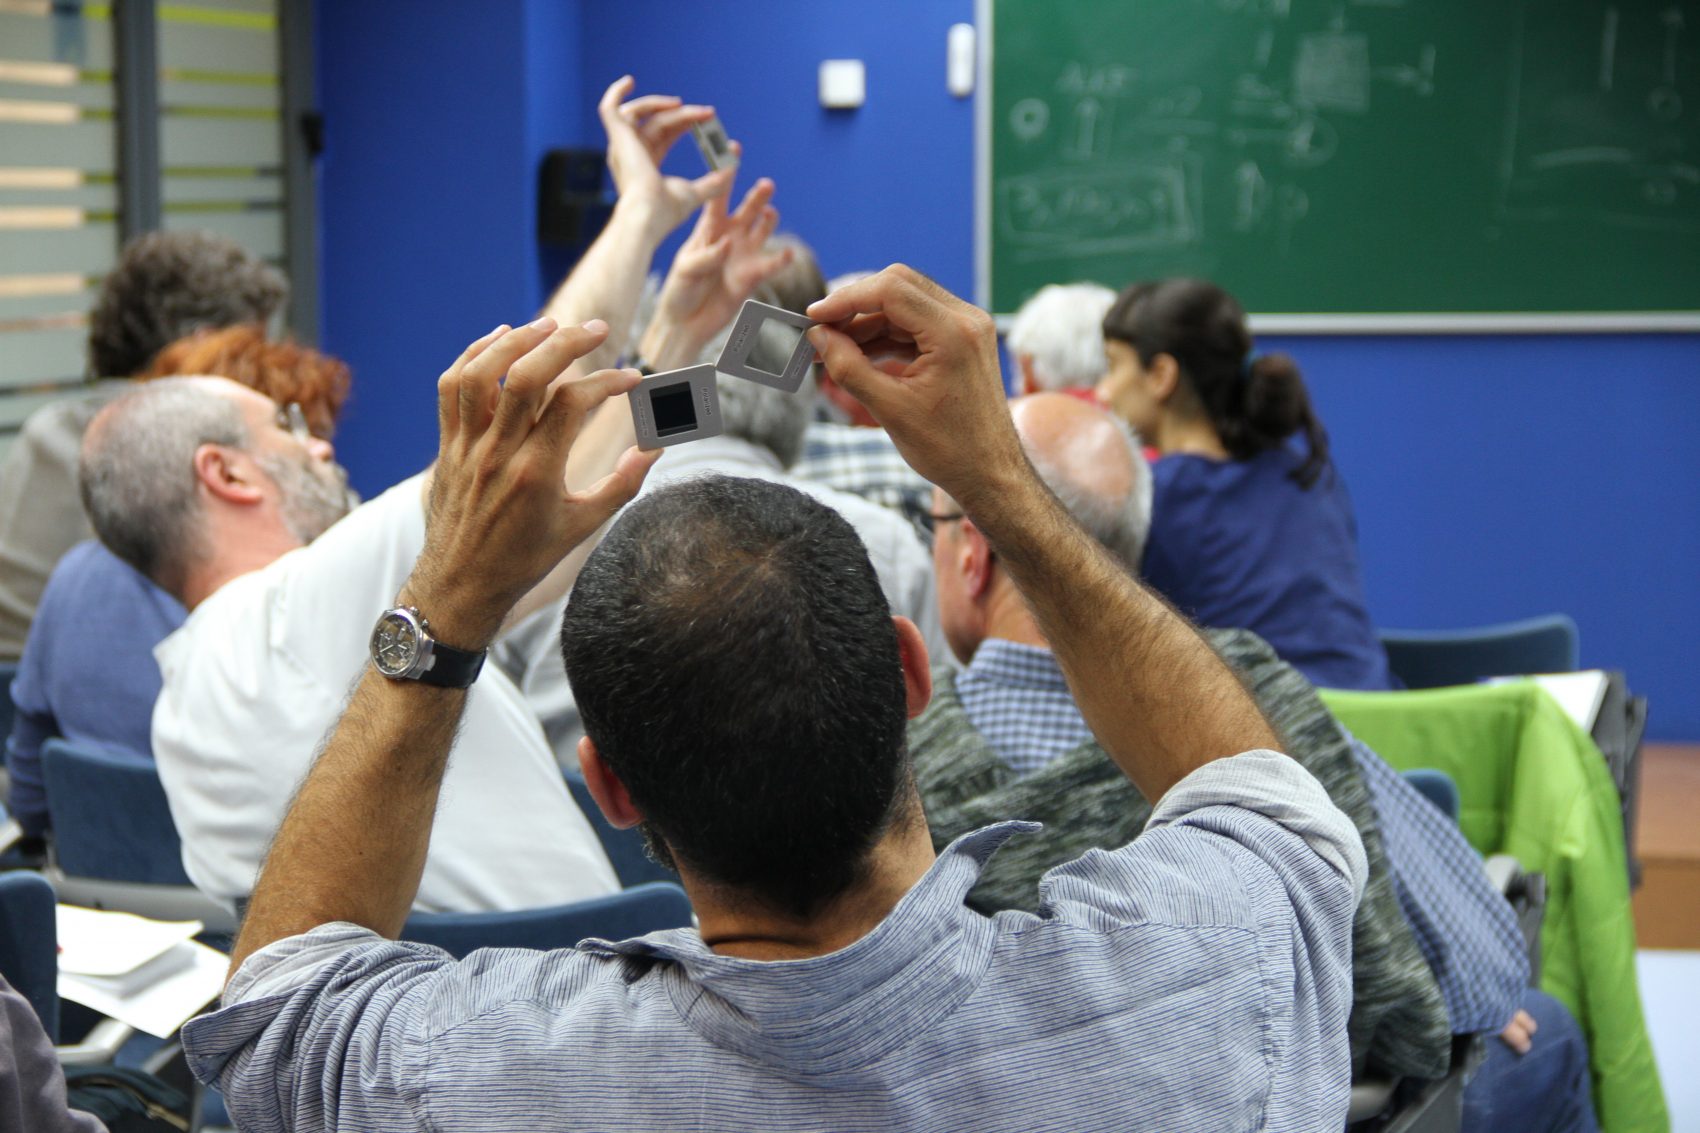 teachers in a classroom learning how to use a polarizer